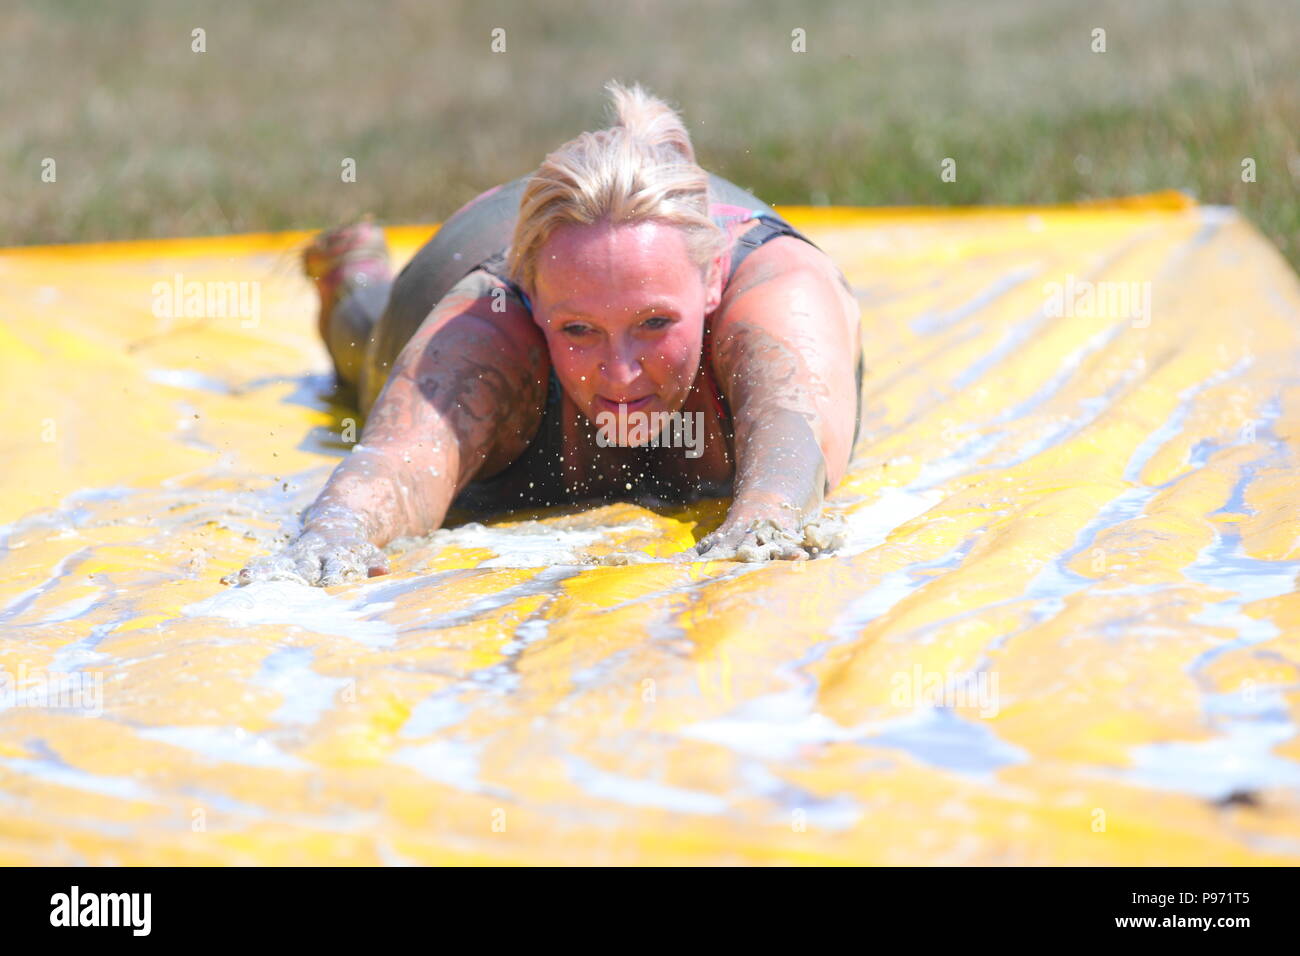 A woman slides down a muddy slide which is one of many muddy obstacles during the Young Mudders event in Leeds. Stock Photo